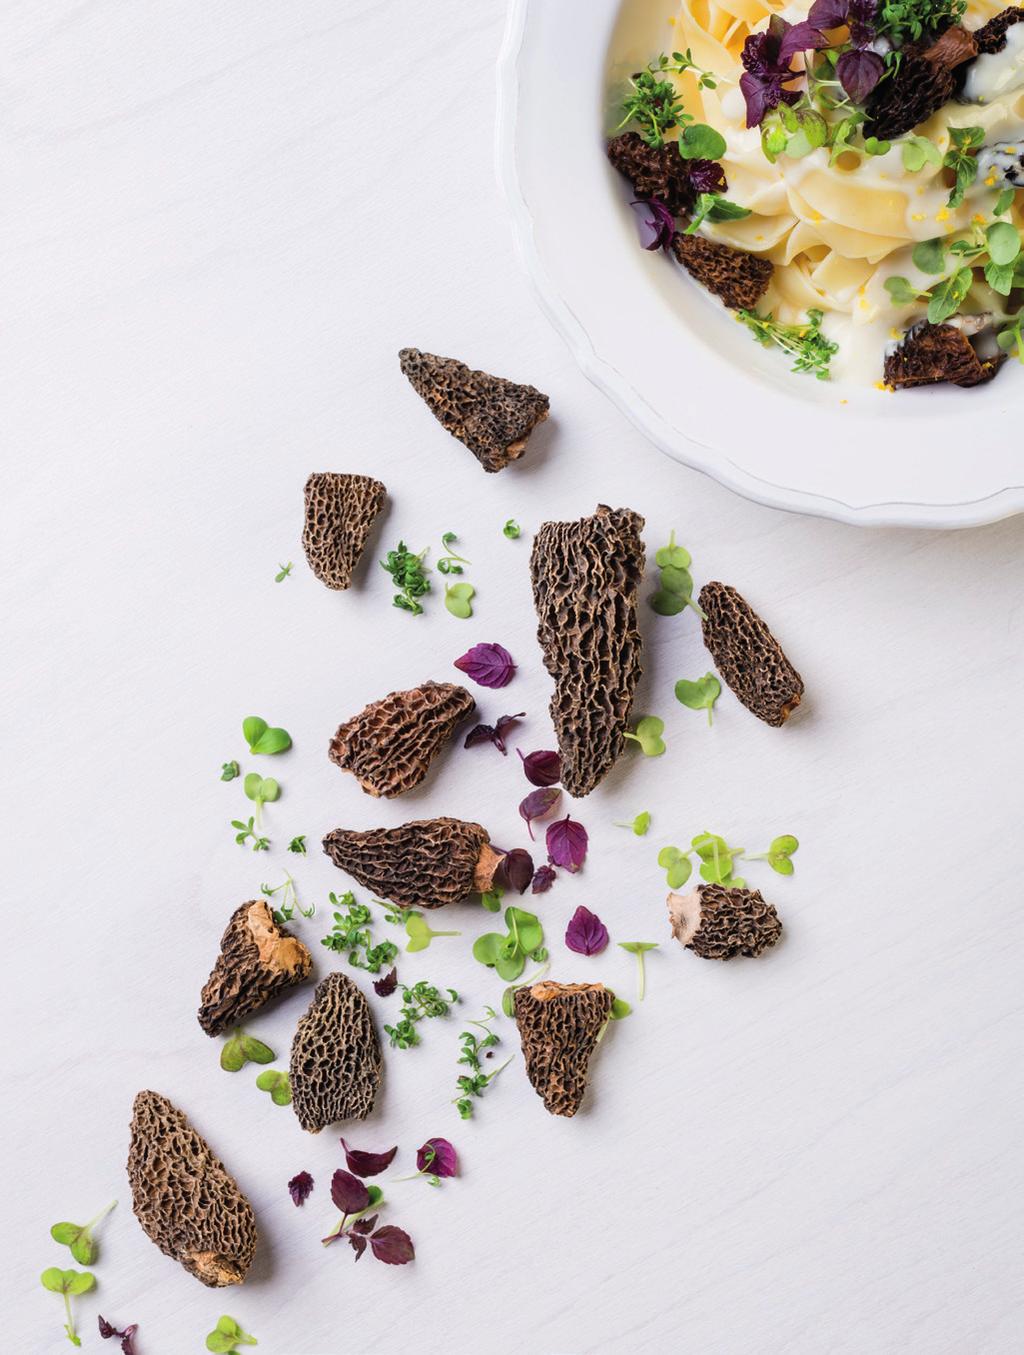 Morels (Morchella conica) Wild mushroom The morel is one of the best and most expensive fine mushroom varieties.